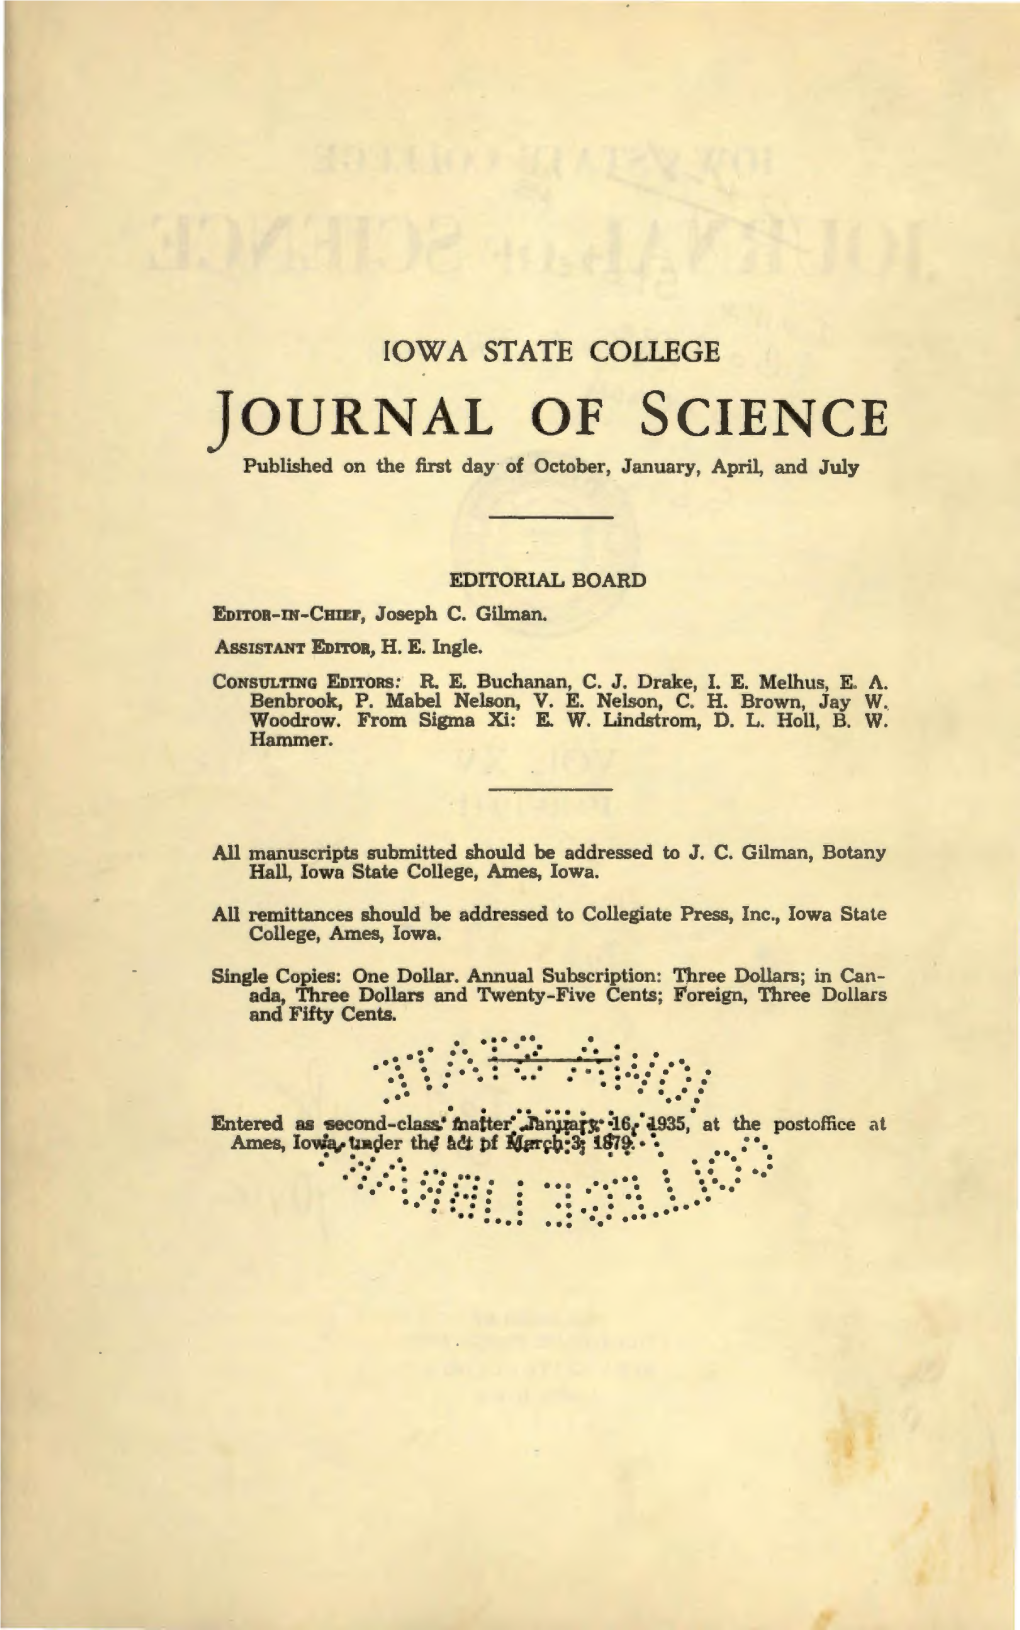 JOURNAL of SCIENCE Published on the First Day of October, January, April, and July